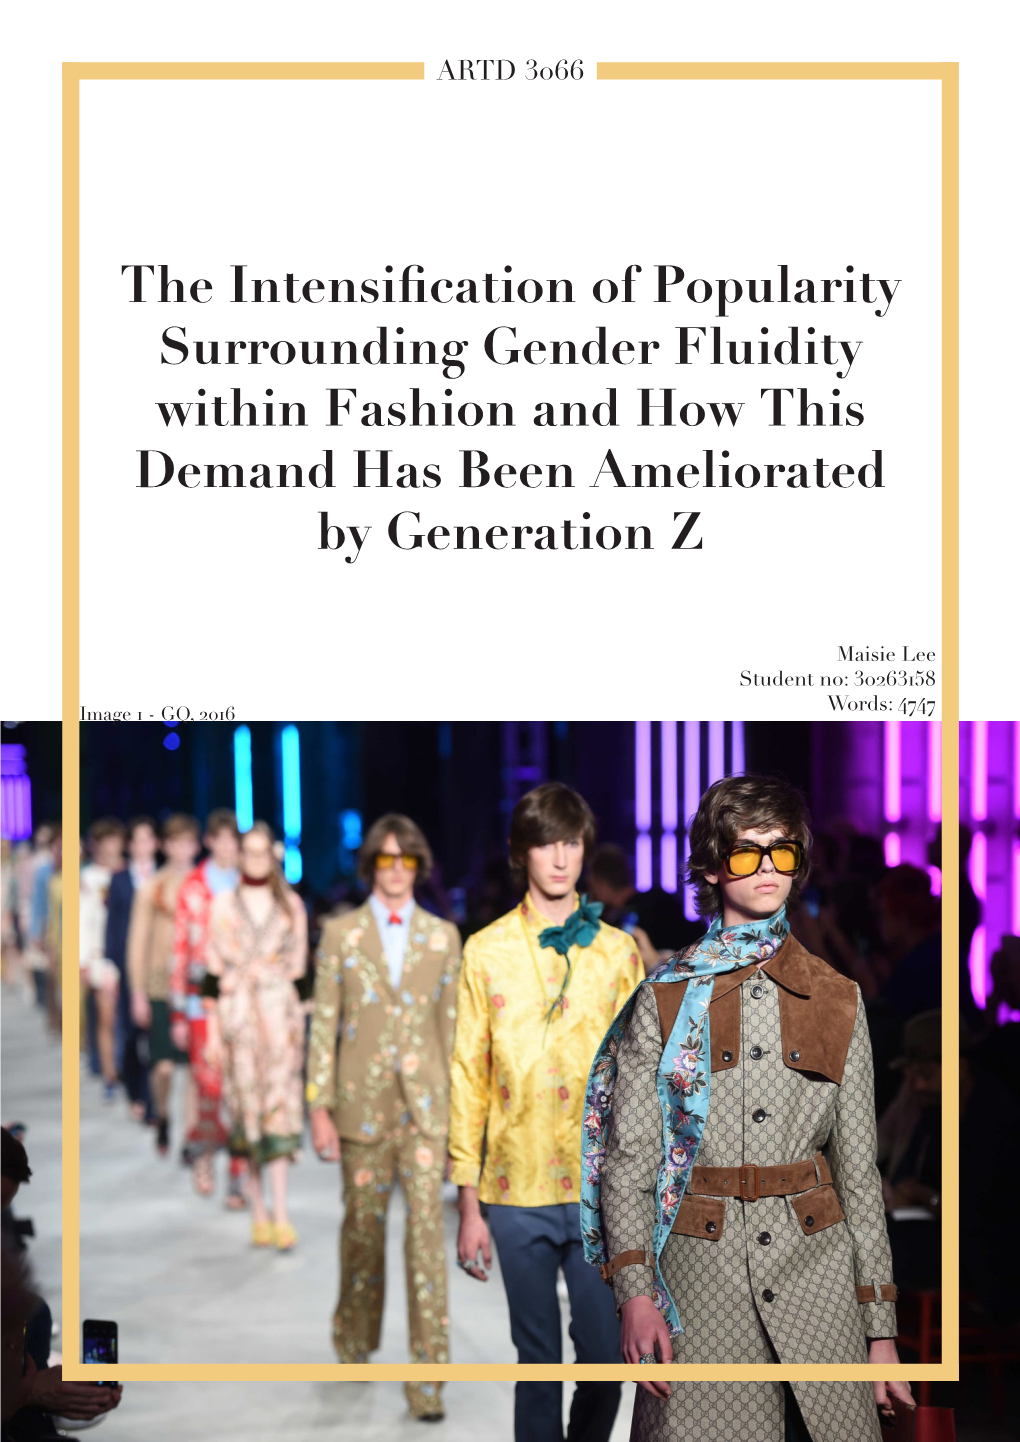 The Intensification of Popularity Surrounding Gender Fluidity Within Fashion and How This Demand Has Been Ameliorated by Generation Z